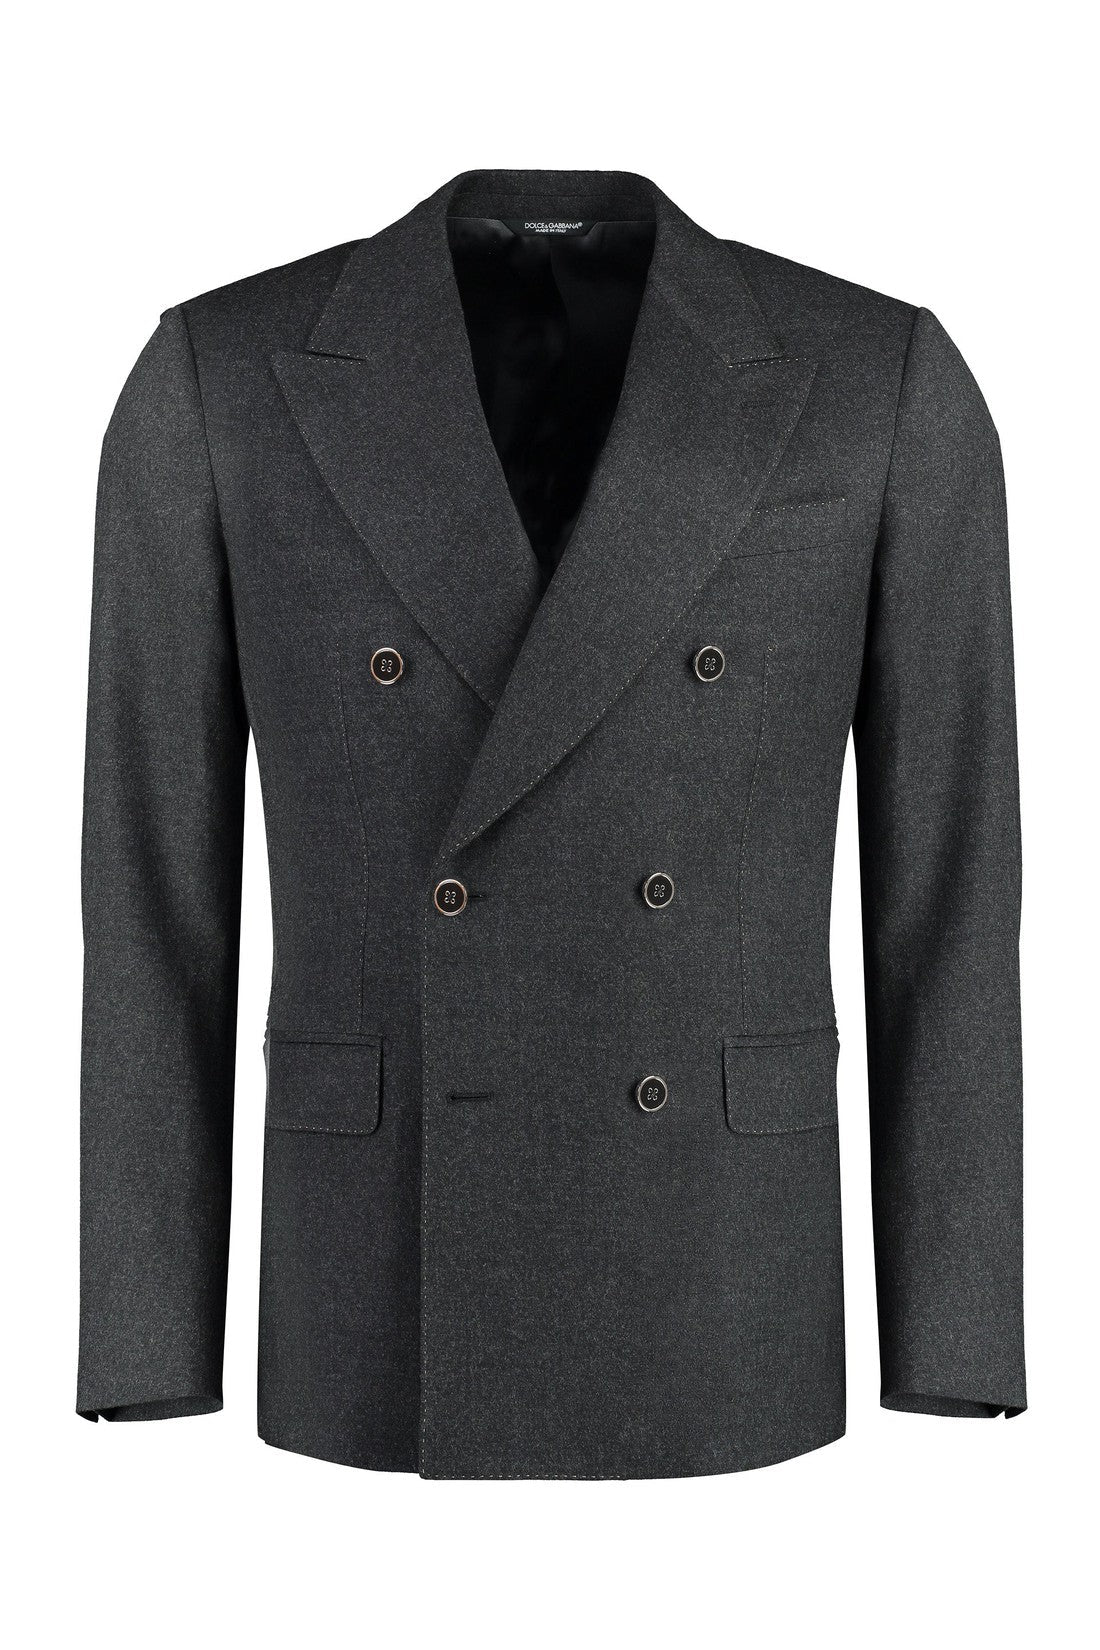 Dolce & Gabbana-OUTLET-SALE-Double-breasted wool blazer-ARCHIVIST